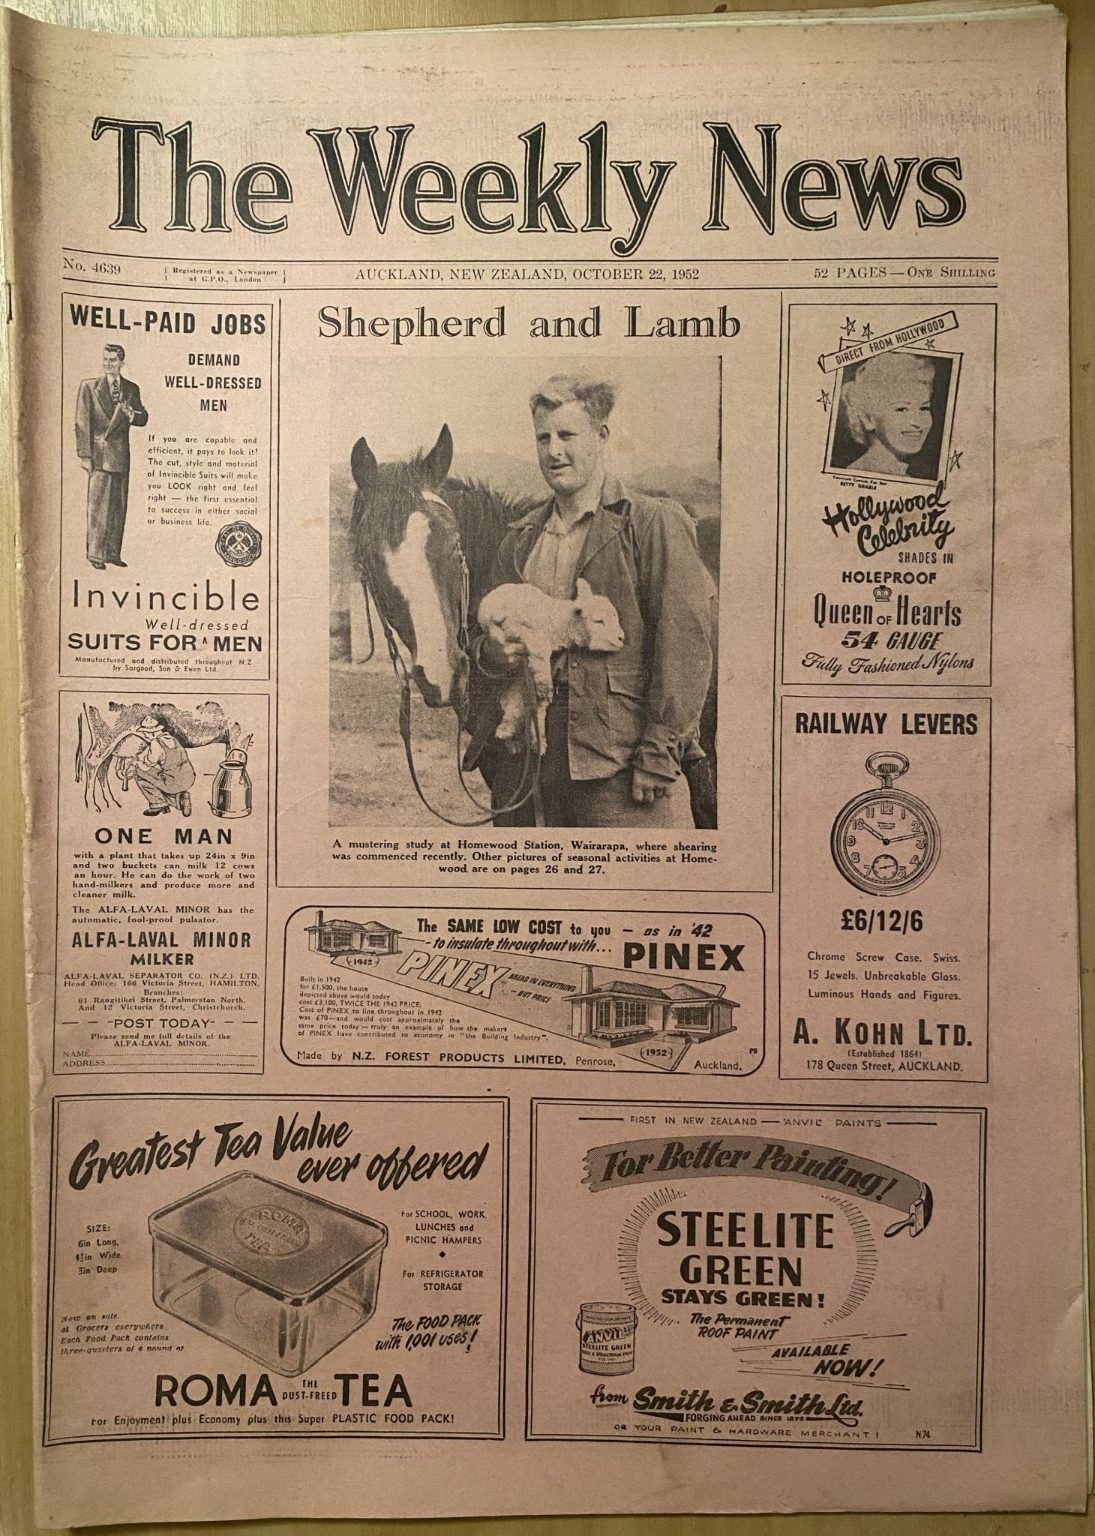 OLD NEWSPAPER: The Weekly News - No. 4639, 22 October 1952